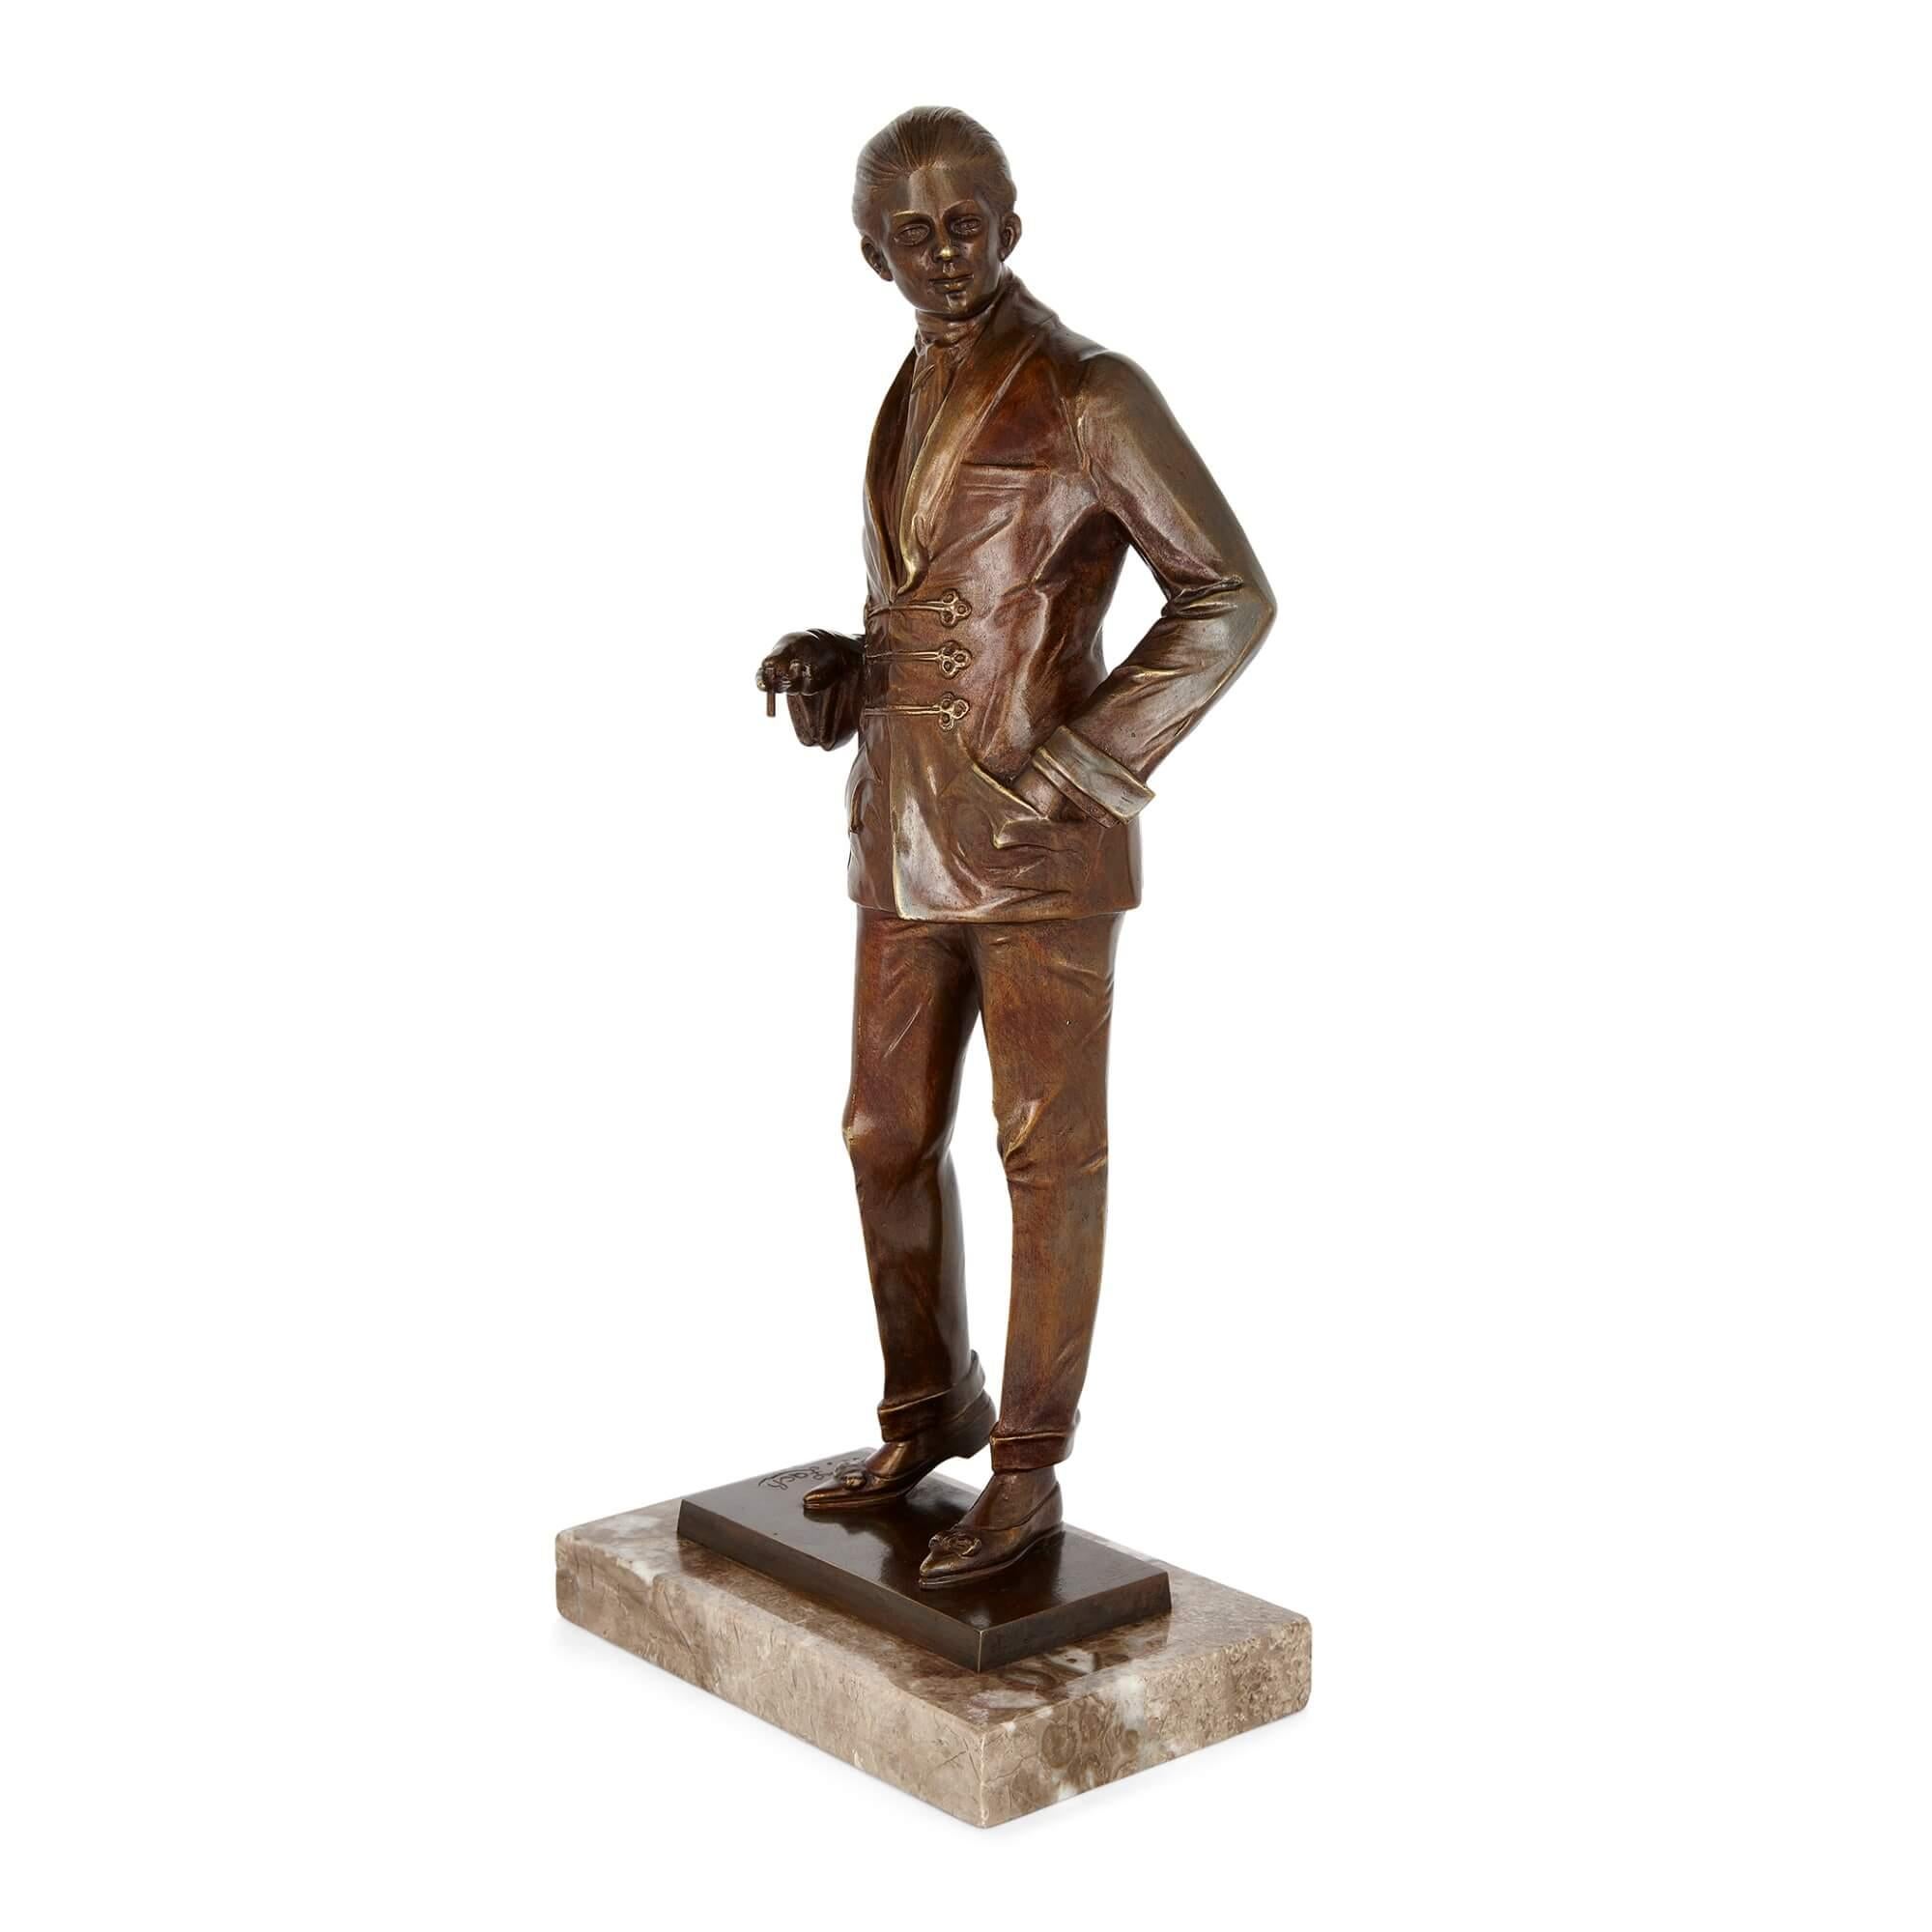 Patinated bronze Art Deco figural sculpture, signed by Bruno Zach
Austrian, Early 20th Century
Height 35cm, width 15cm, depth 10cm

This excellent figural sculpture was made by Bruno Zach, a highly regarded Austrian artist active in the early